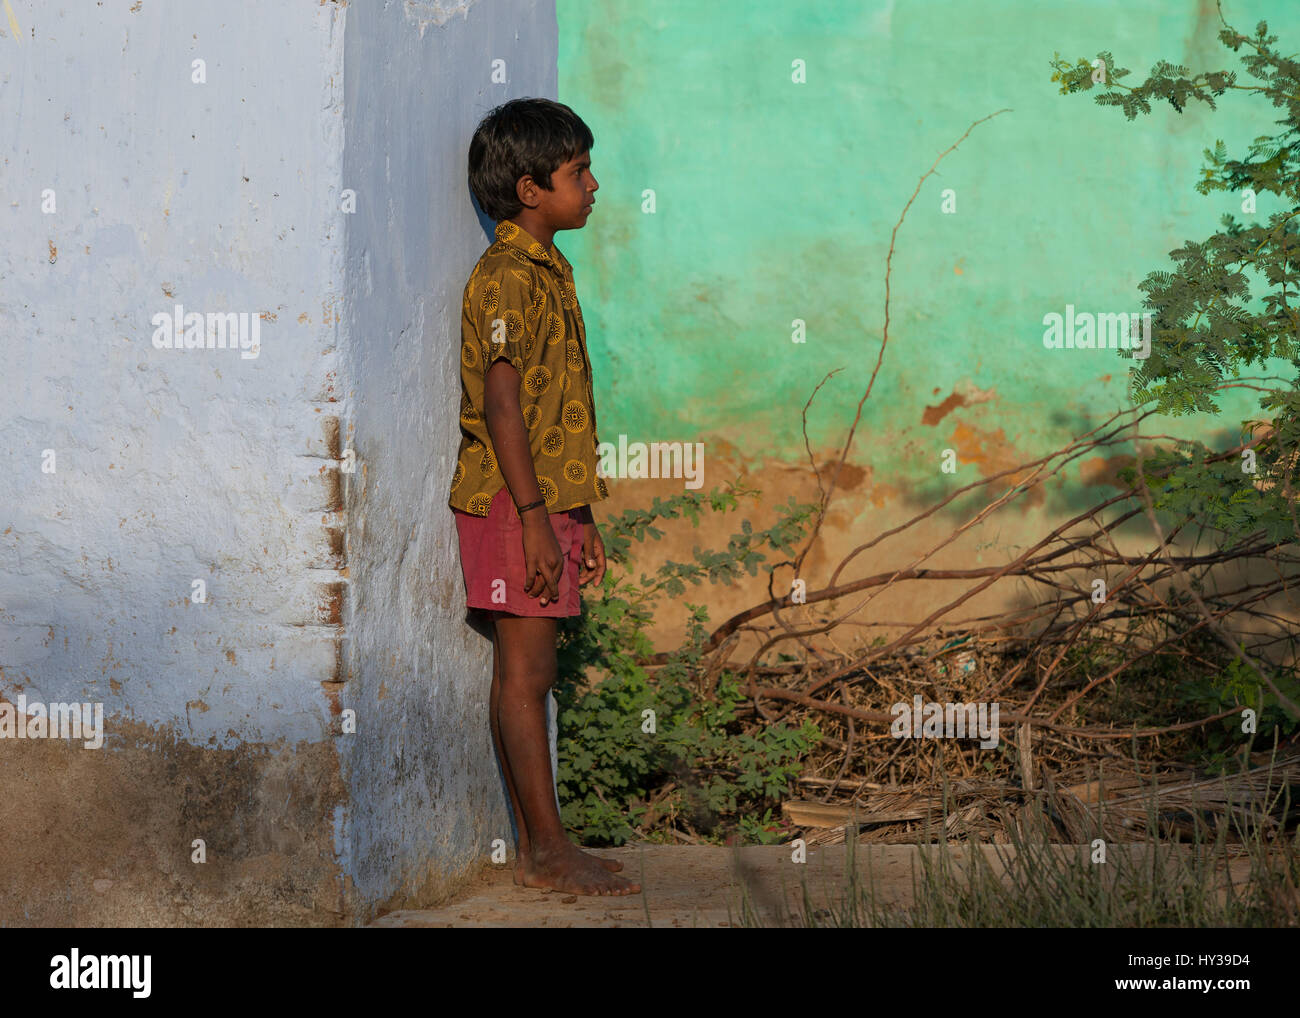 Young boy leaning against wall in Koonthankulam, Tamil Nadu,India, Stock Photo